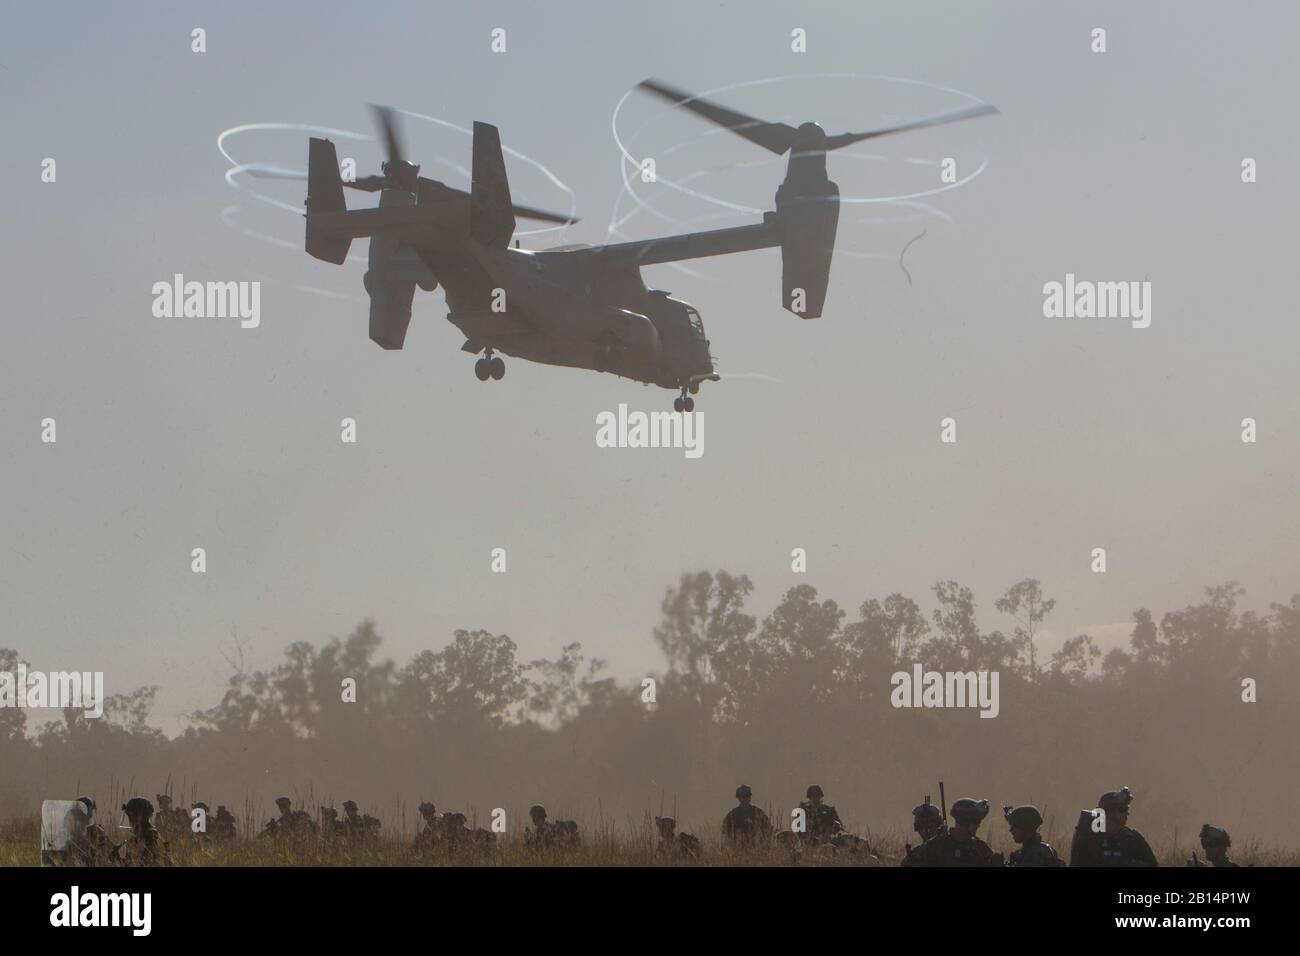 An MV-22B Osprey tiltrotor aircraft takes off after dropping off Marines with Kilo Company, Battalion Landing Team, 3rd Battalion, 5th Marines, during an embassy reinforcement exercise a part of Certification Exercise at Shoalwater Bay Training Area, Queensland, Australia, Aug. 11, 2017. BLT 3/5 is the Ground Combat Element of the 31st Marine Expeditionary Unit. The 31st MEU and Amphibious Squadron 11 are conducting Certification Exercise, the final evaluation in a series of training exercises which ensure readiness for crisis response throughout the Indo-Asia-Pacific region. The 31st MEU part Stock Photo